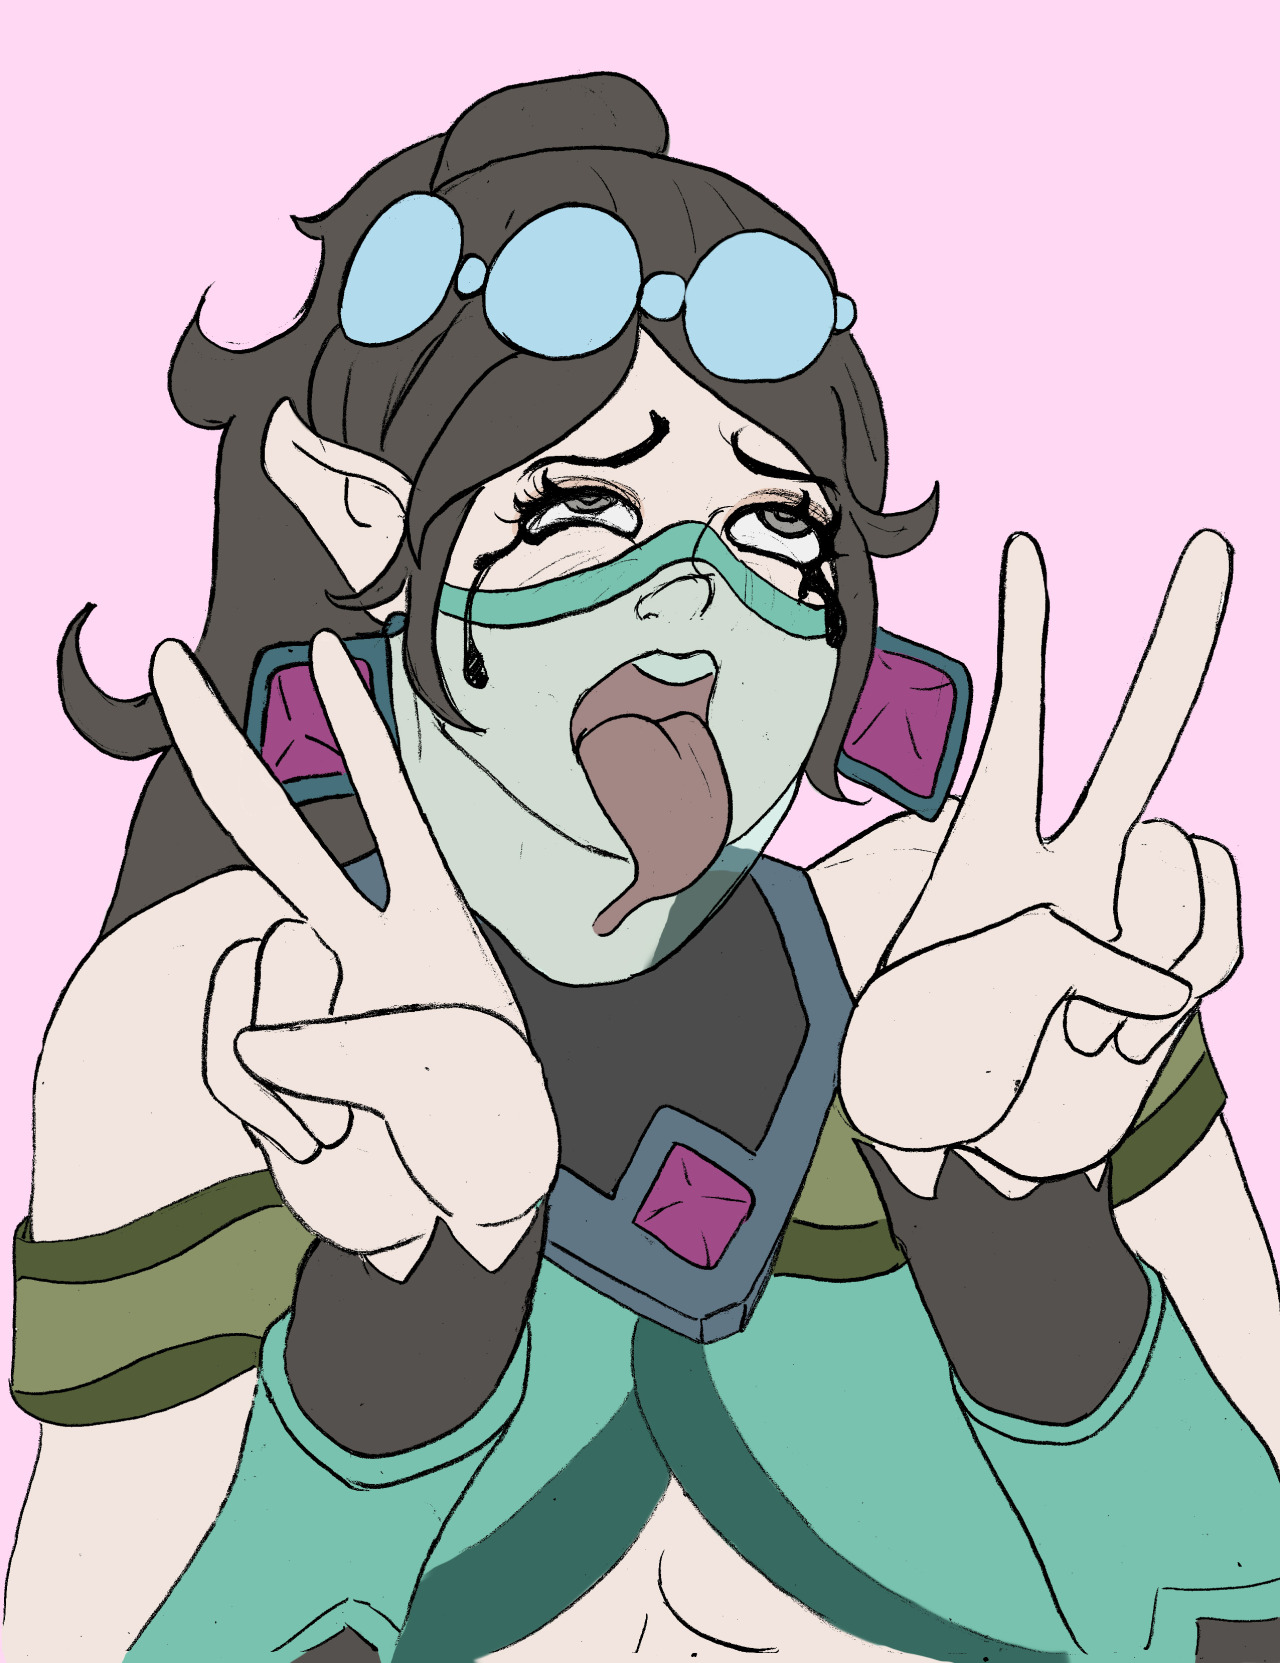 “Hey Ying! how much is 3   1?”So Im back, hard week and all that. I cant be the